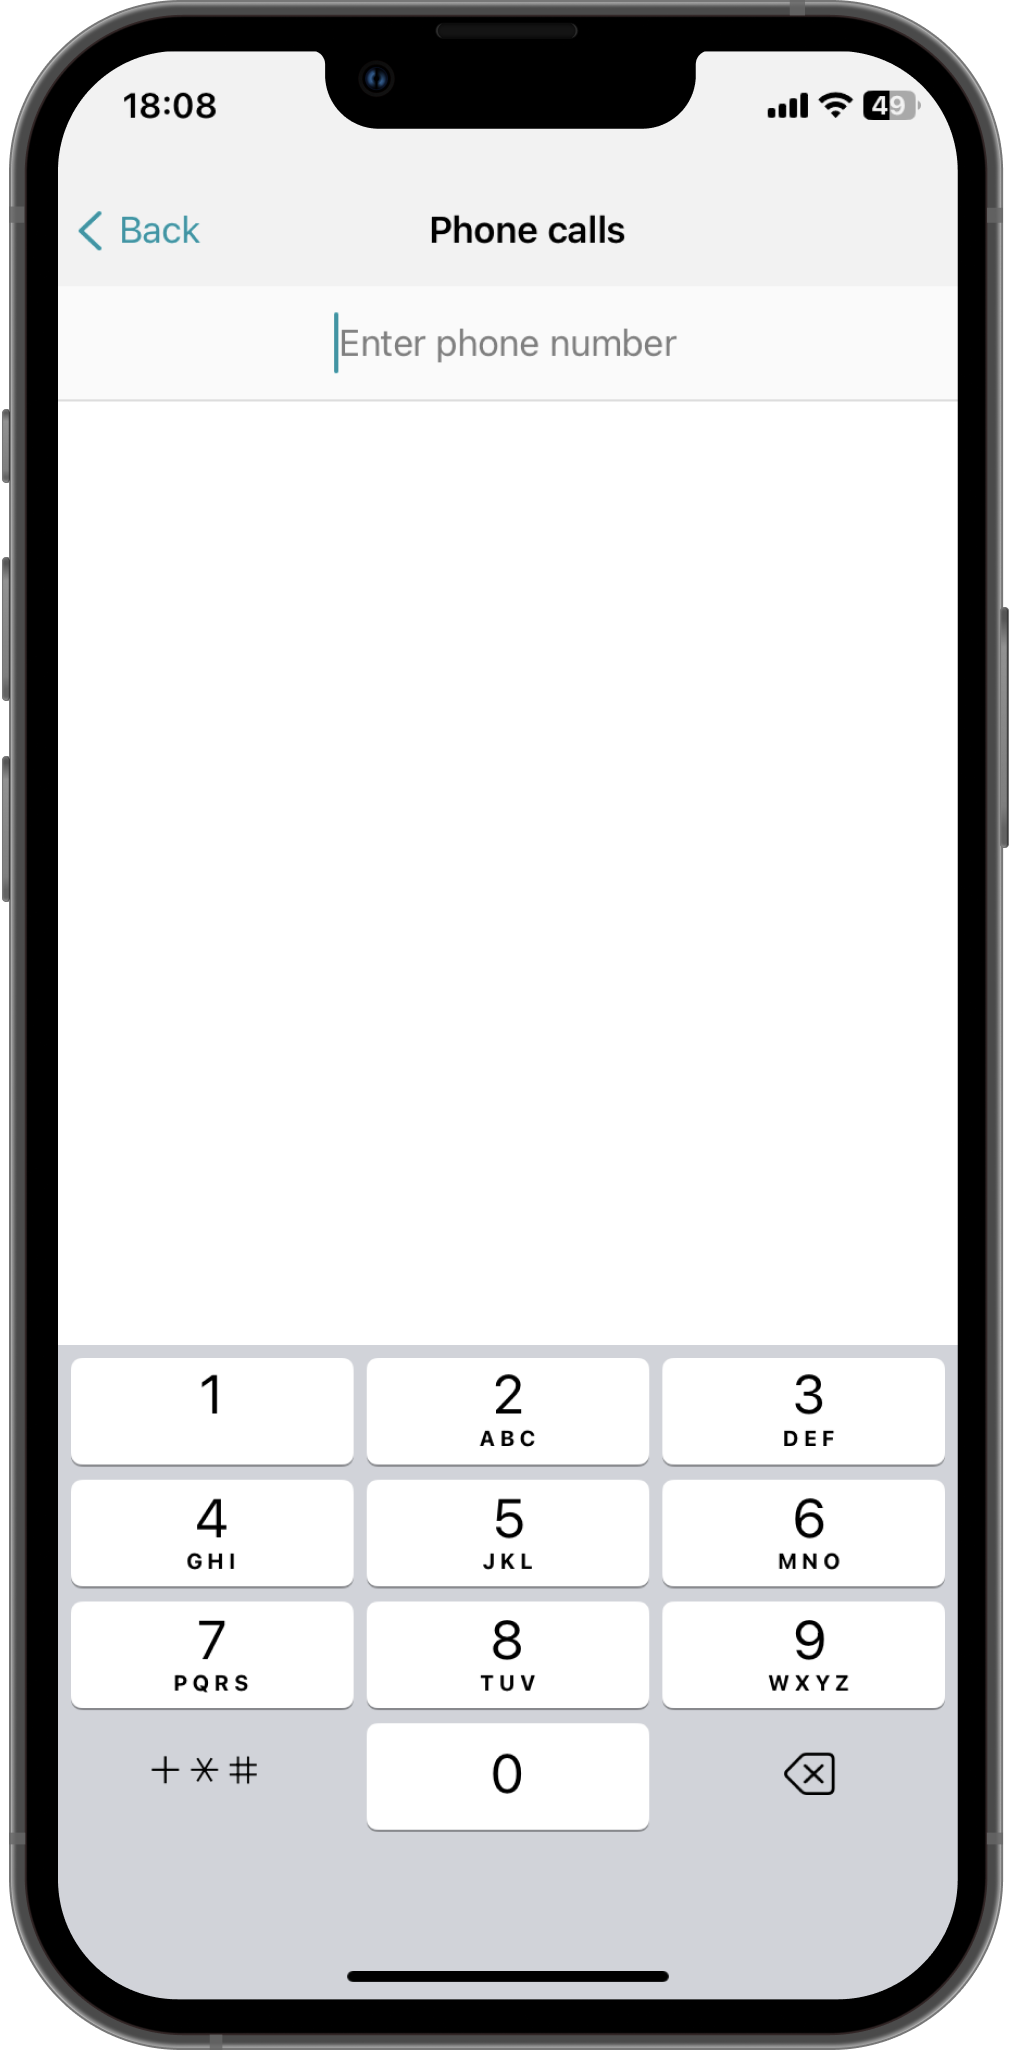 TrueConf 3.4.1 for iOS: Easy dialer startup, indicator of disabled microphone, and updated Options menu 3